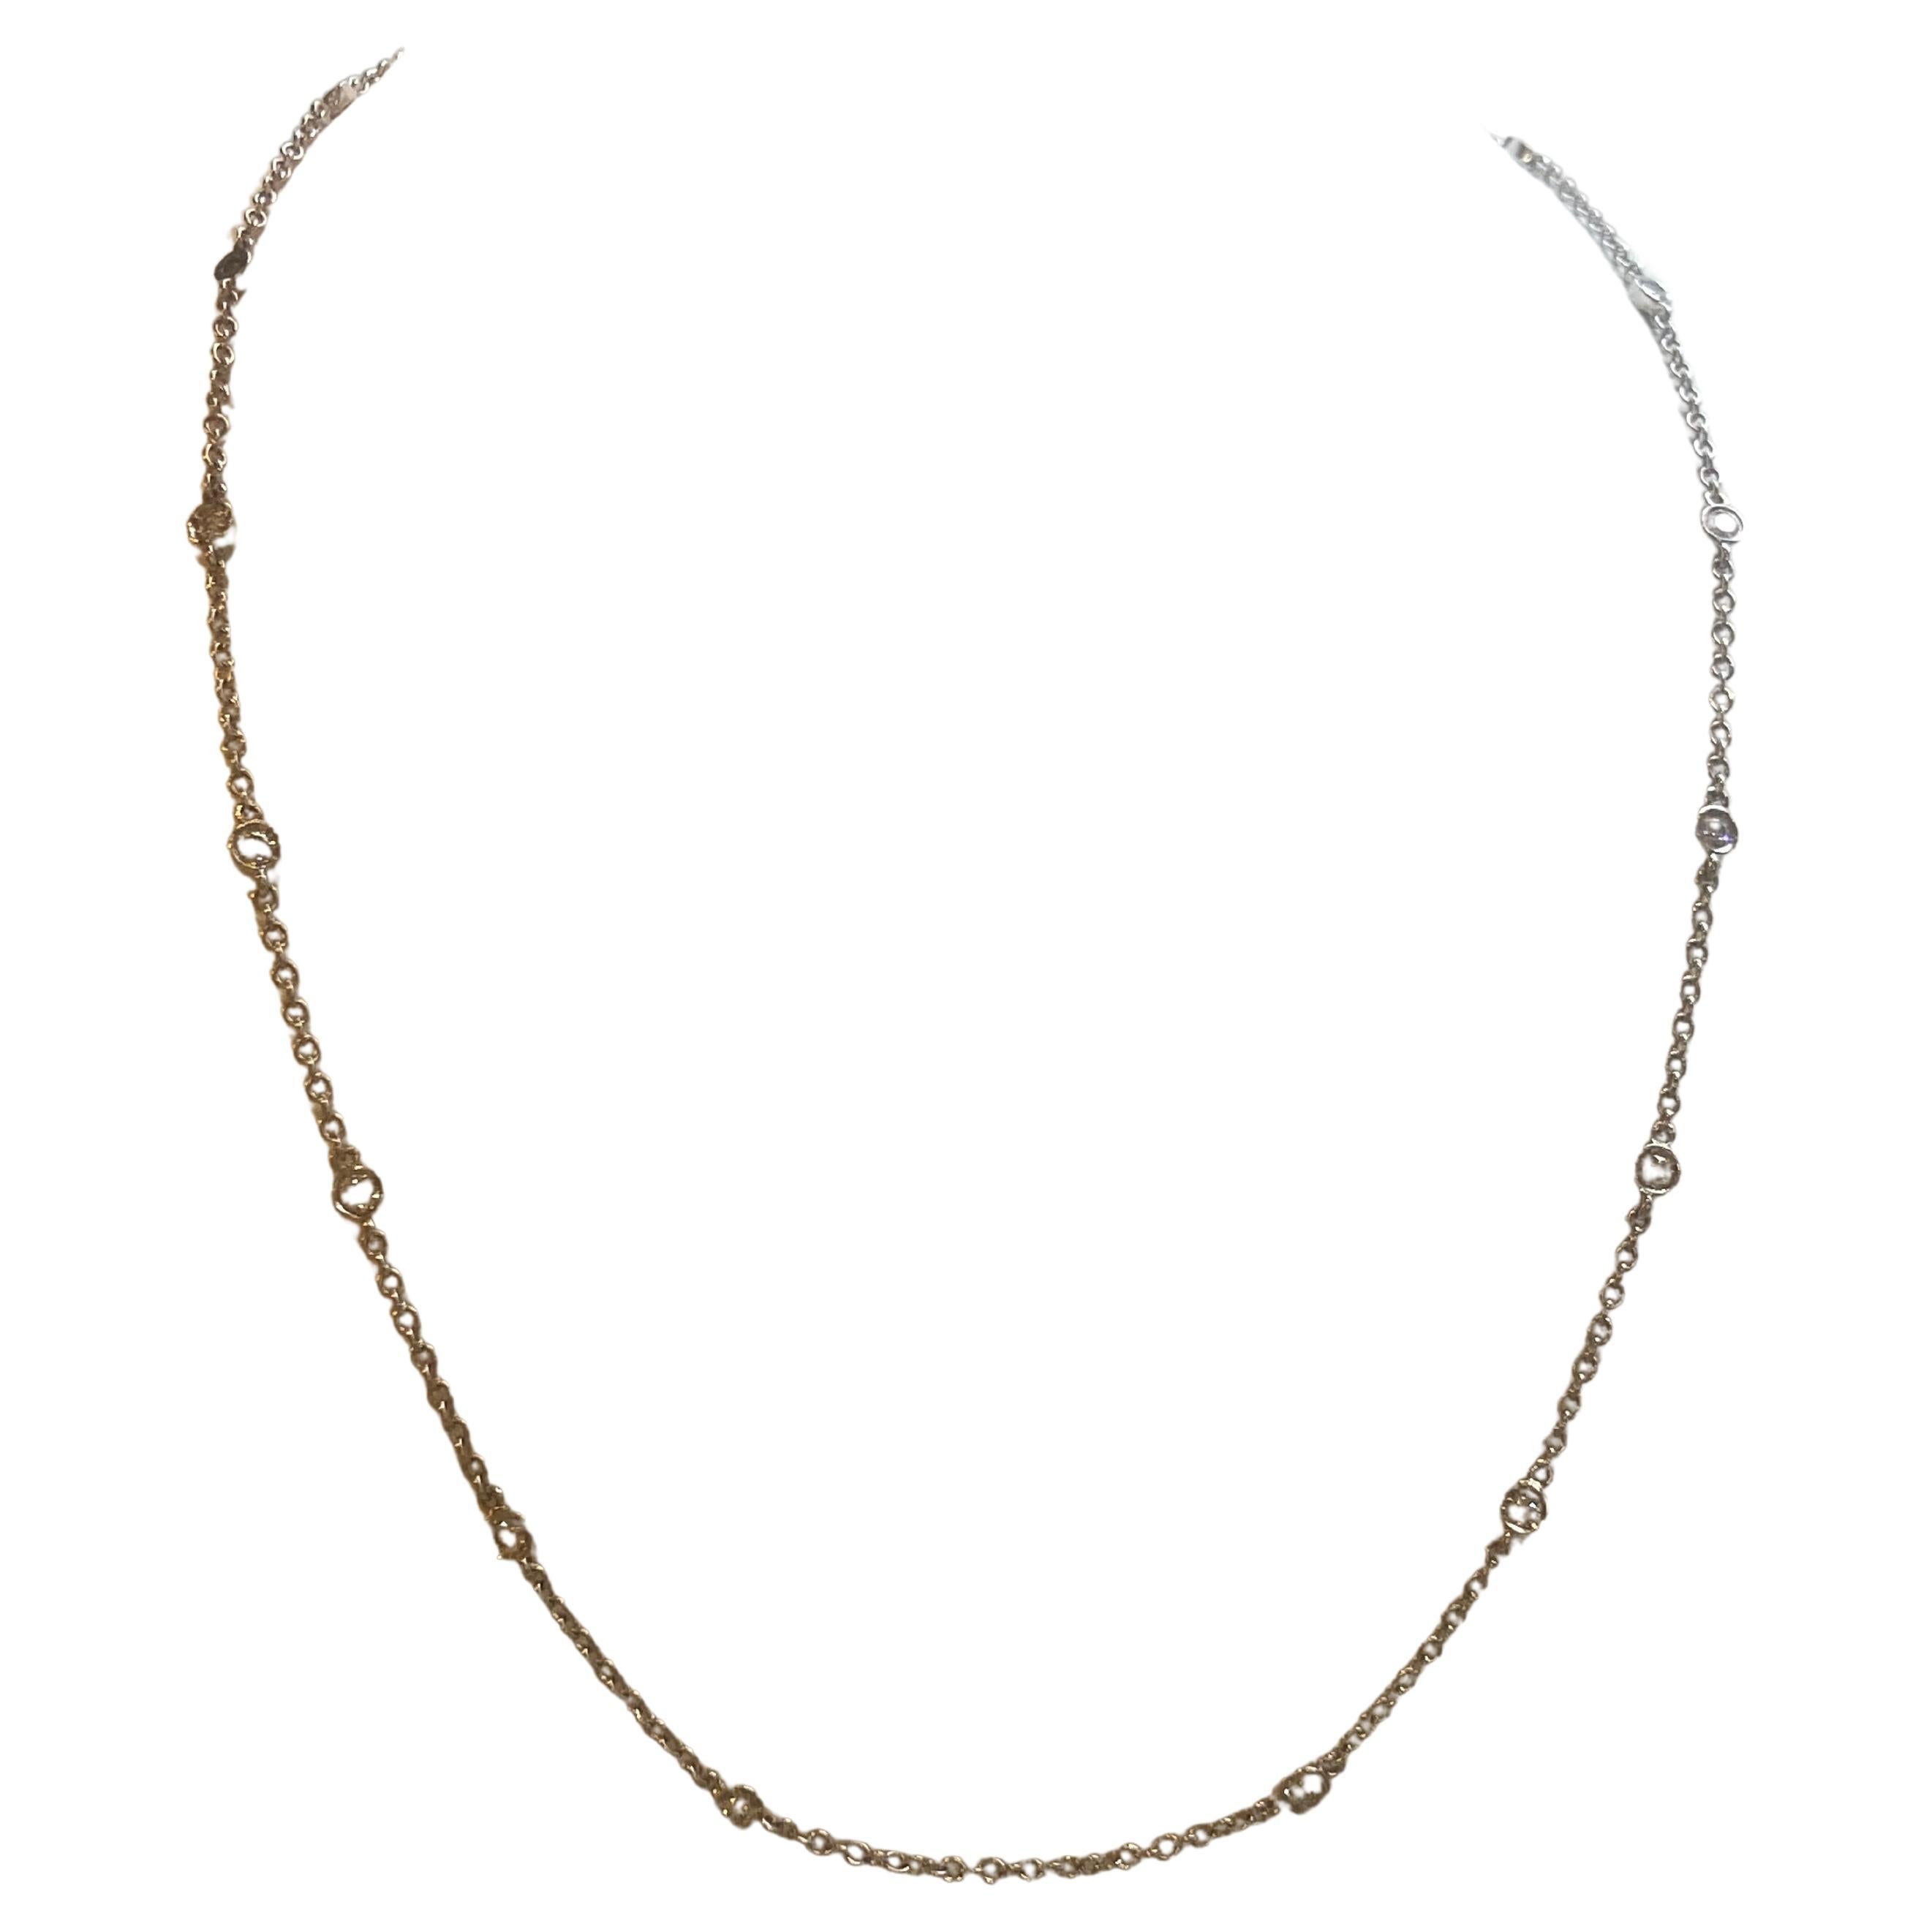 0.96ctw Diamonds By The Yard Necklace in 14KT White Gold For Sale